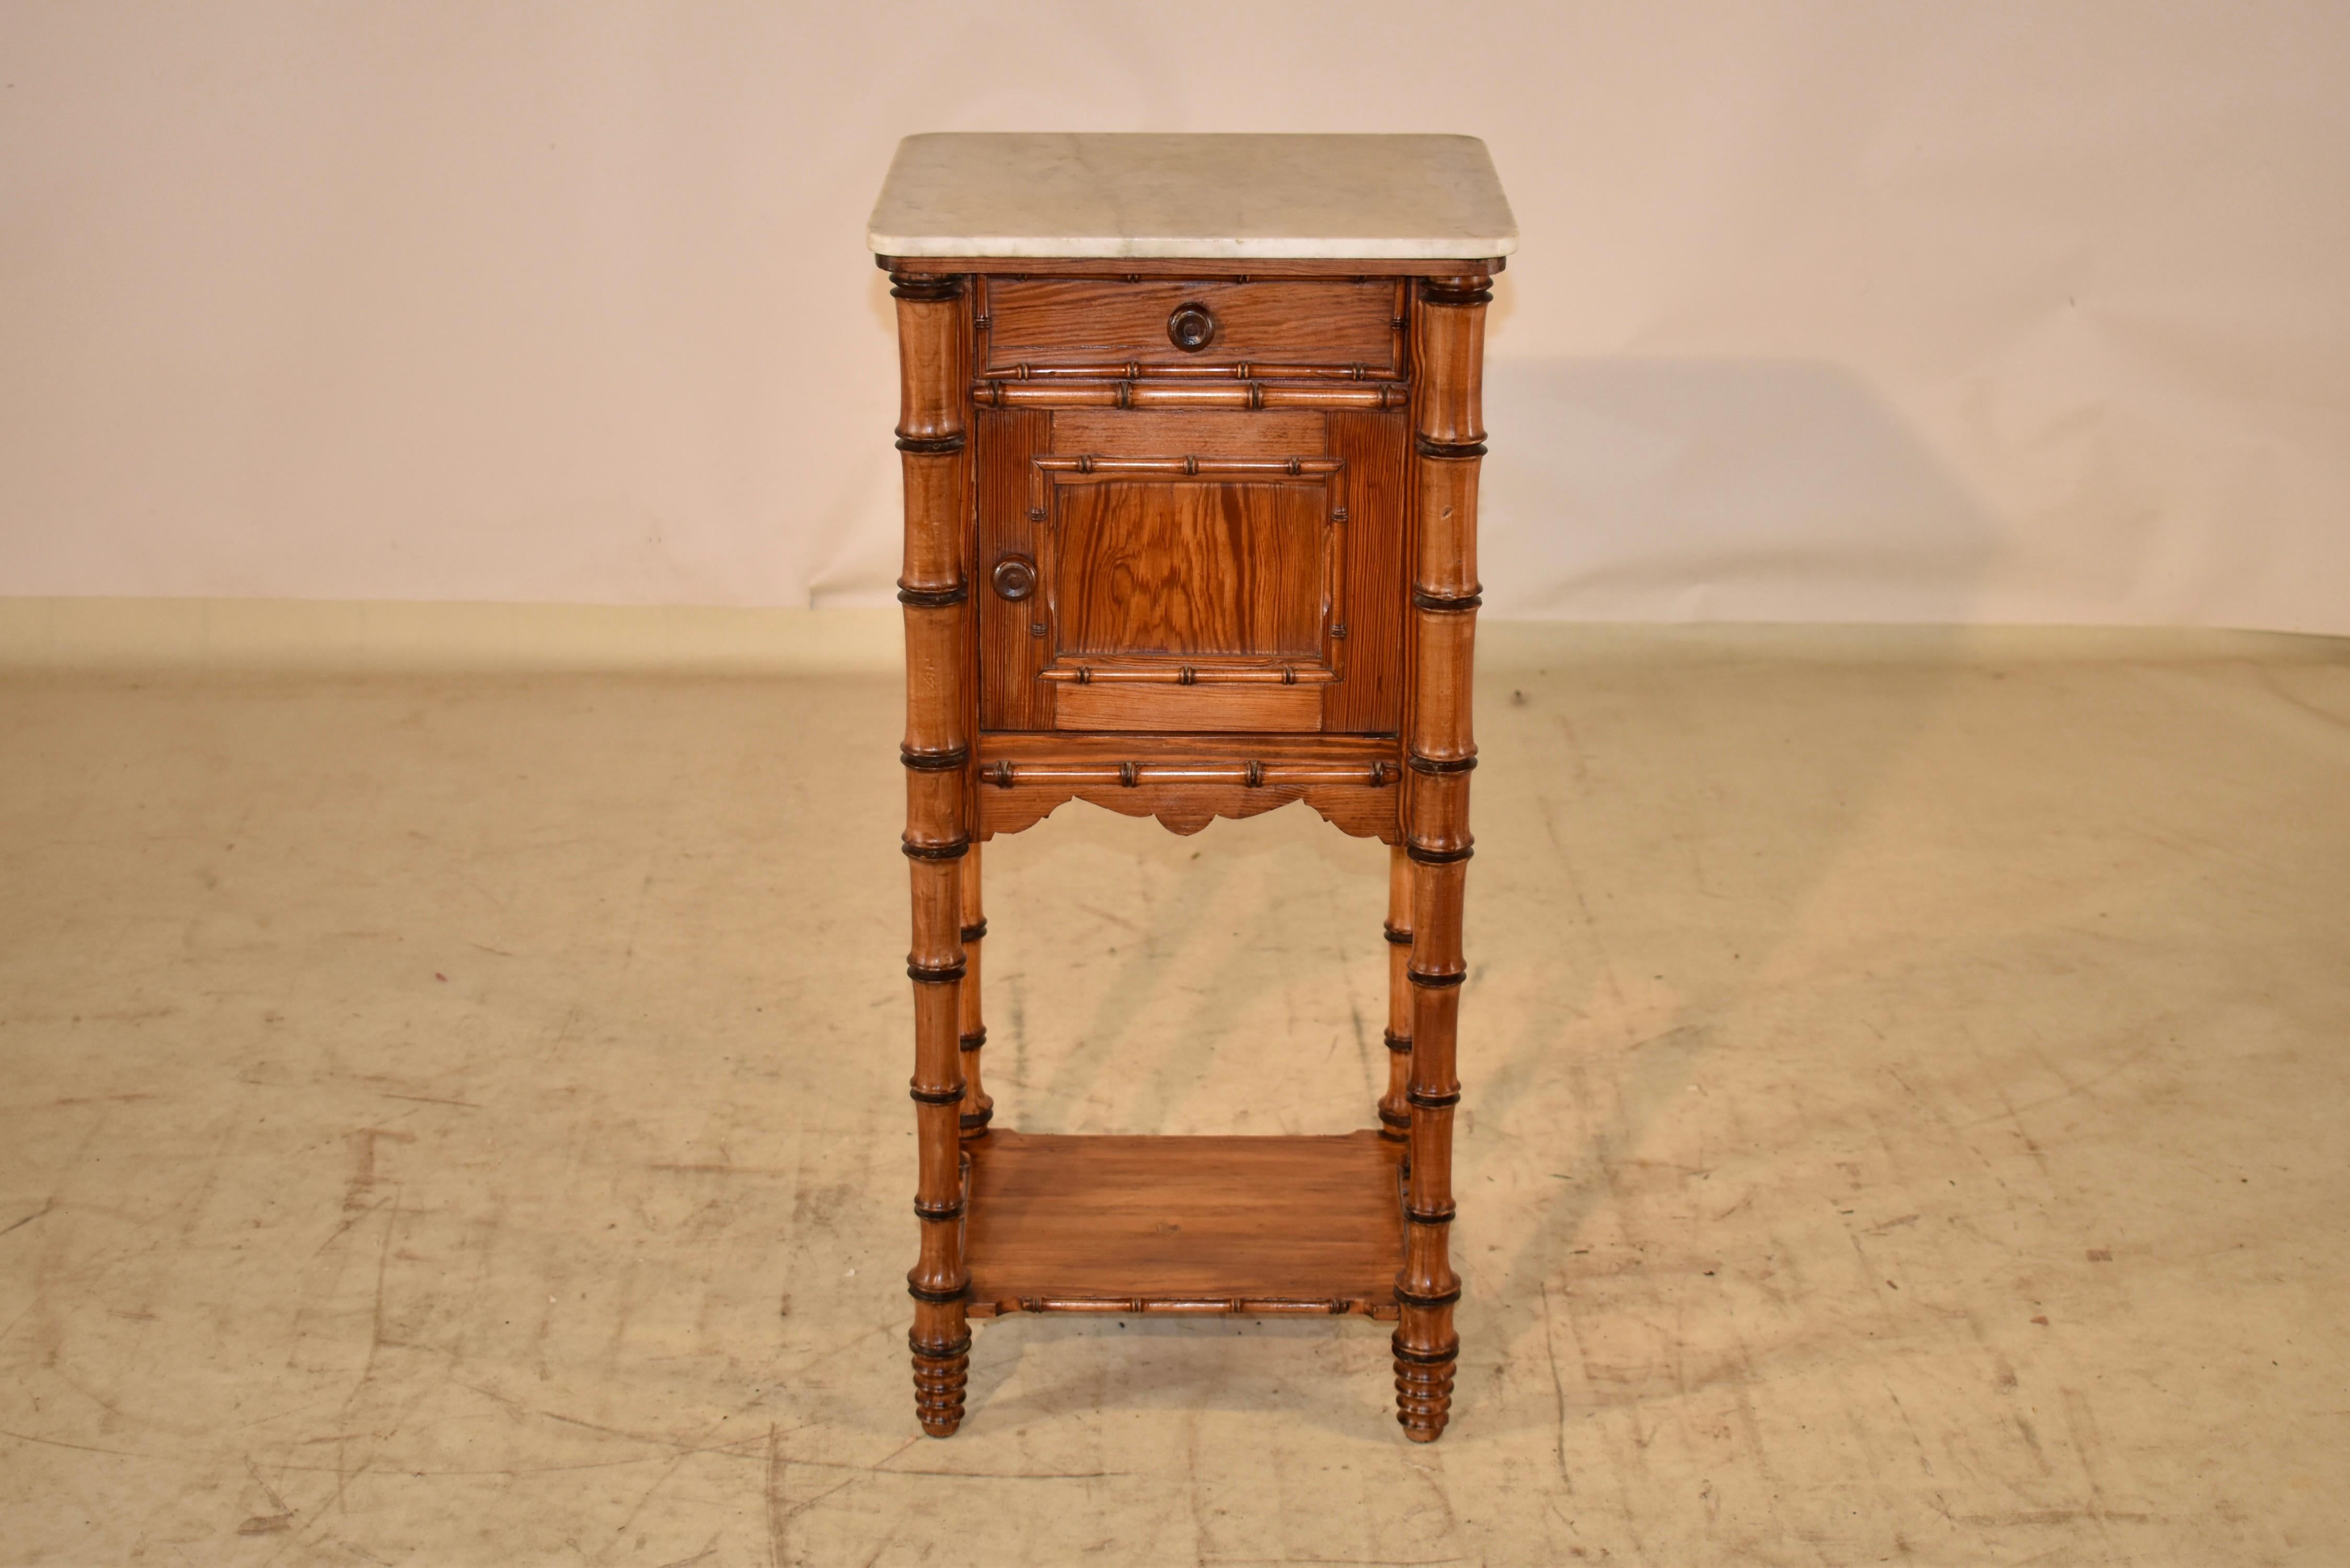 19th century side table in faux bamboo style of the Art Nouveau period in France. The top is made from marble, and sits on a cabinet, which opens to reveal a storage space, which is very useful. The sides are simple and have applied hand turned faux